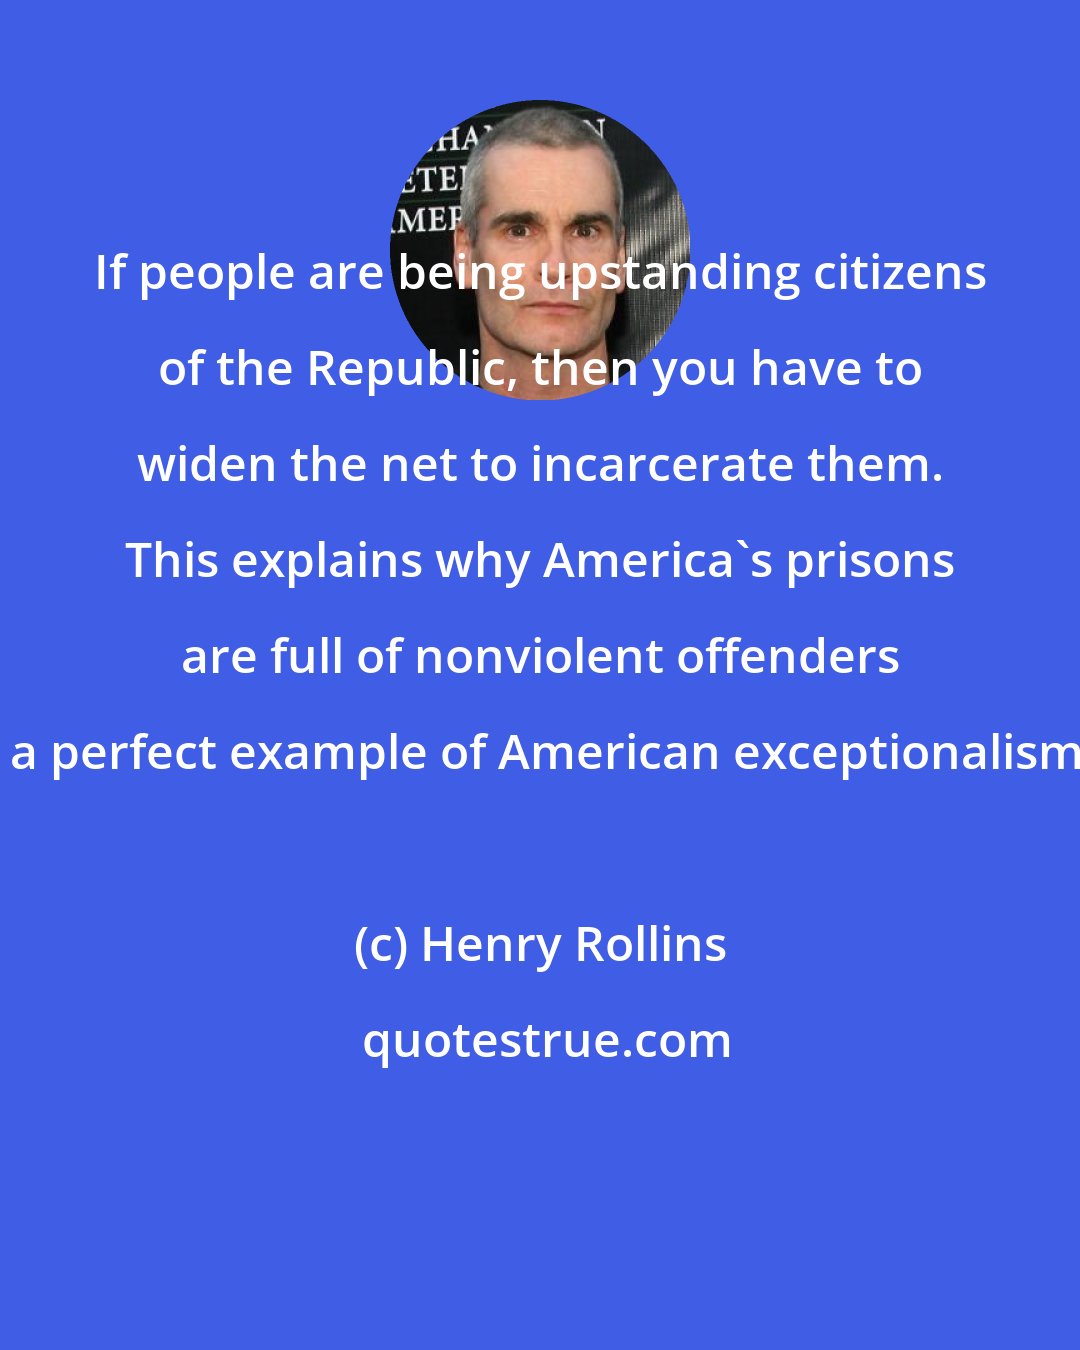 Henry Rollins: If people are being upstanding citizens of the Republic, then you have to widen the net to incarcerate them. This explains why America's prisons are full of nonviolent offenders - a perfect example of American exceptionalism.